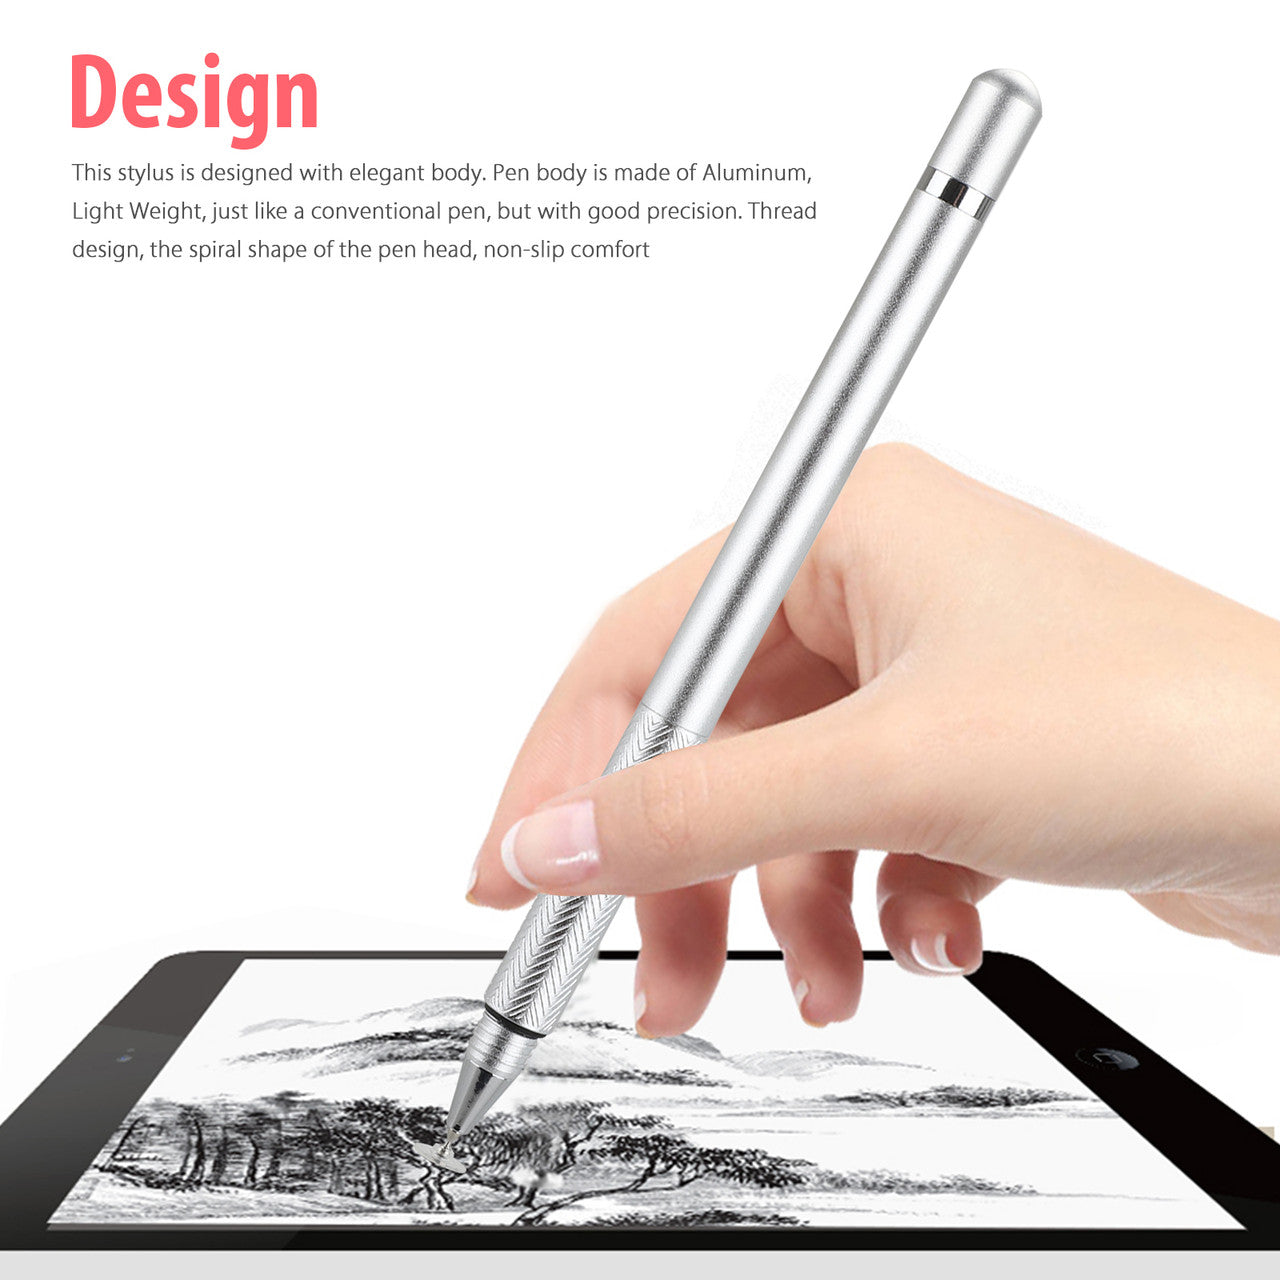 Stylus Pens for Touch Screens, Capacitive Pen High Sensitivity Stylus Pencil, Universal Fit for Apple/iPhone/iPad Pro/Mini/Air/Android/Microsoft/Surface and Other Touch Screens, Silver, 2Pcs